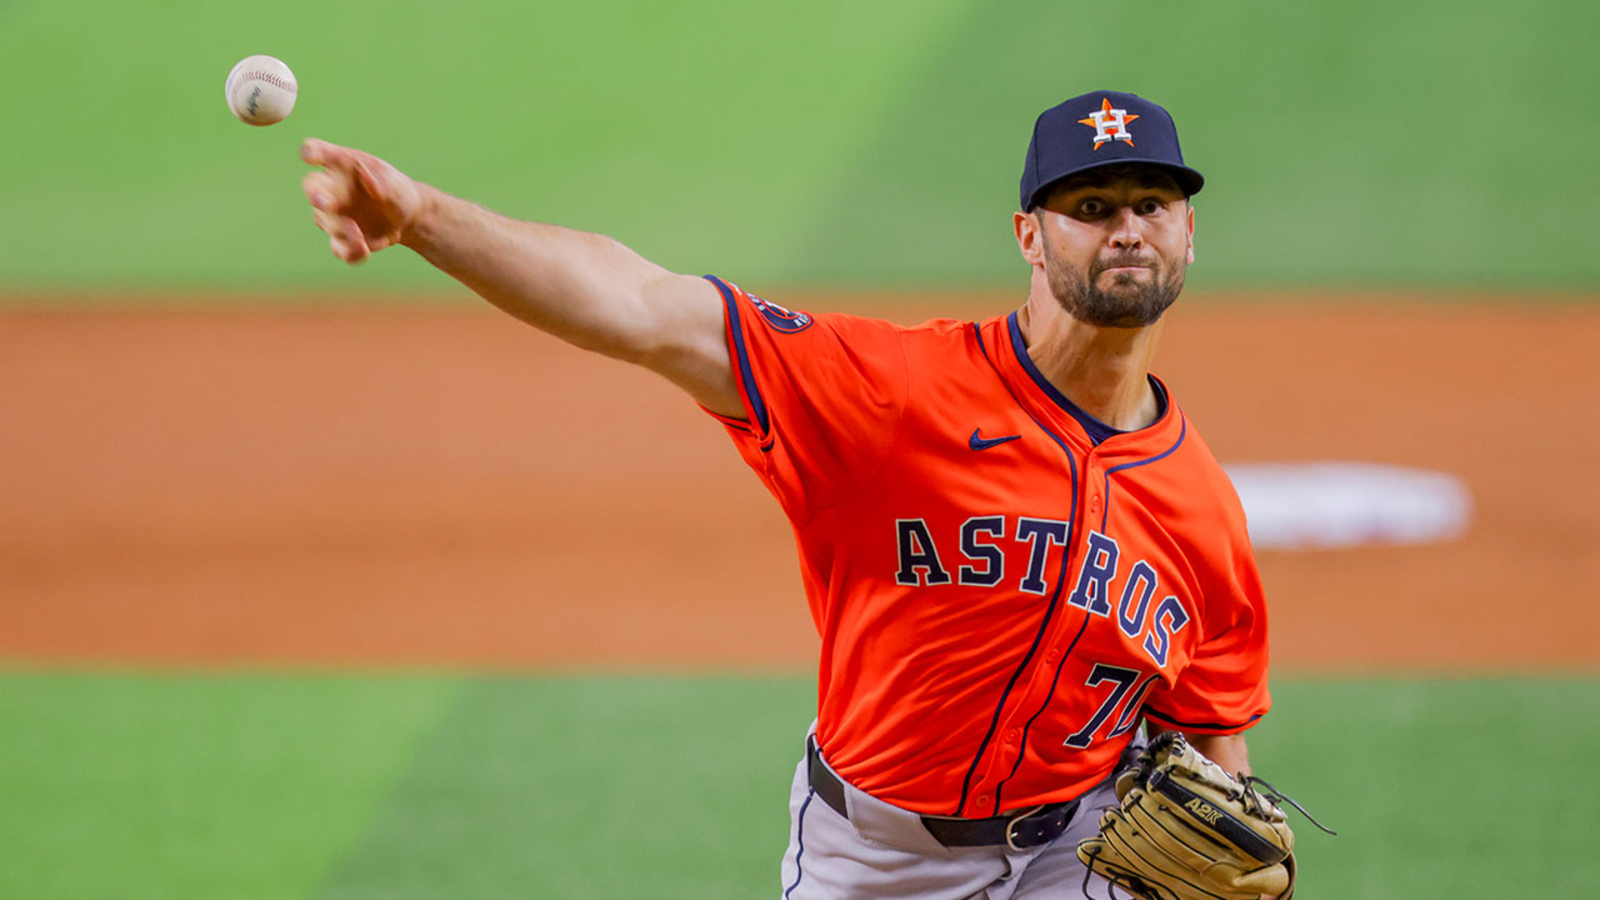 Blair Henley MLB debut: Astros call-up faces 9 batters, lasts just one-third of first inning in 10-5 win vs. Texas Rangers [Video]